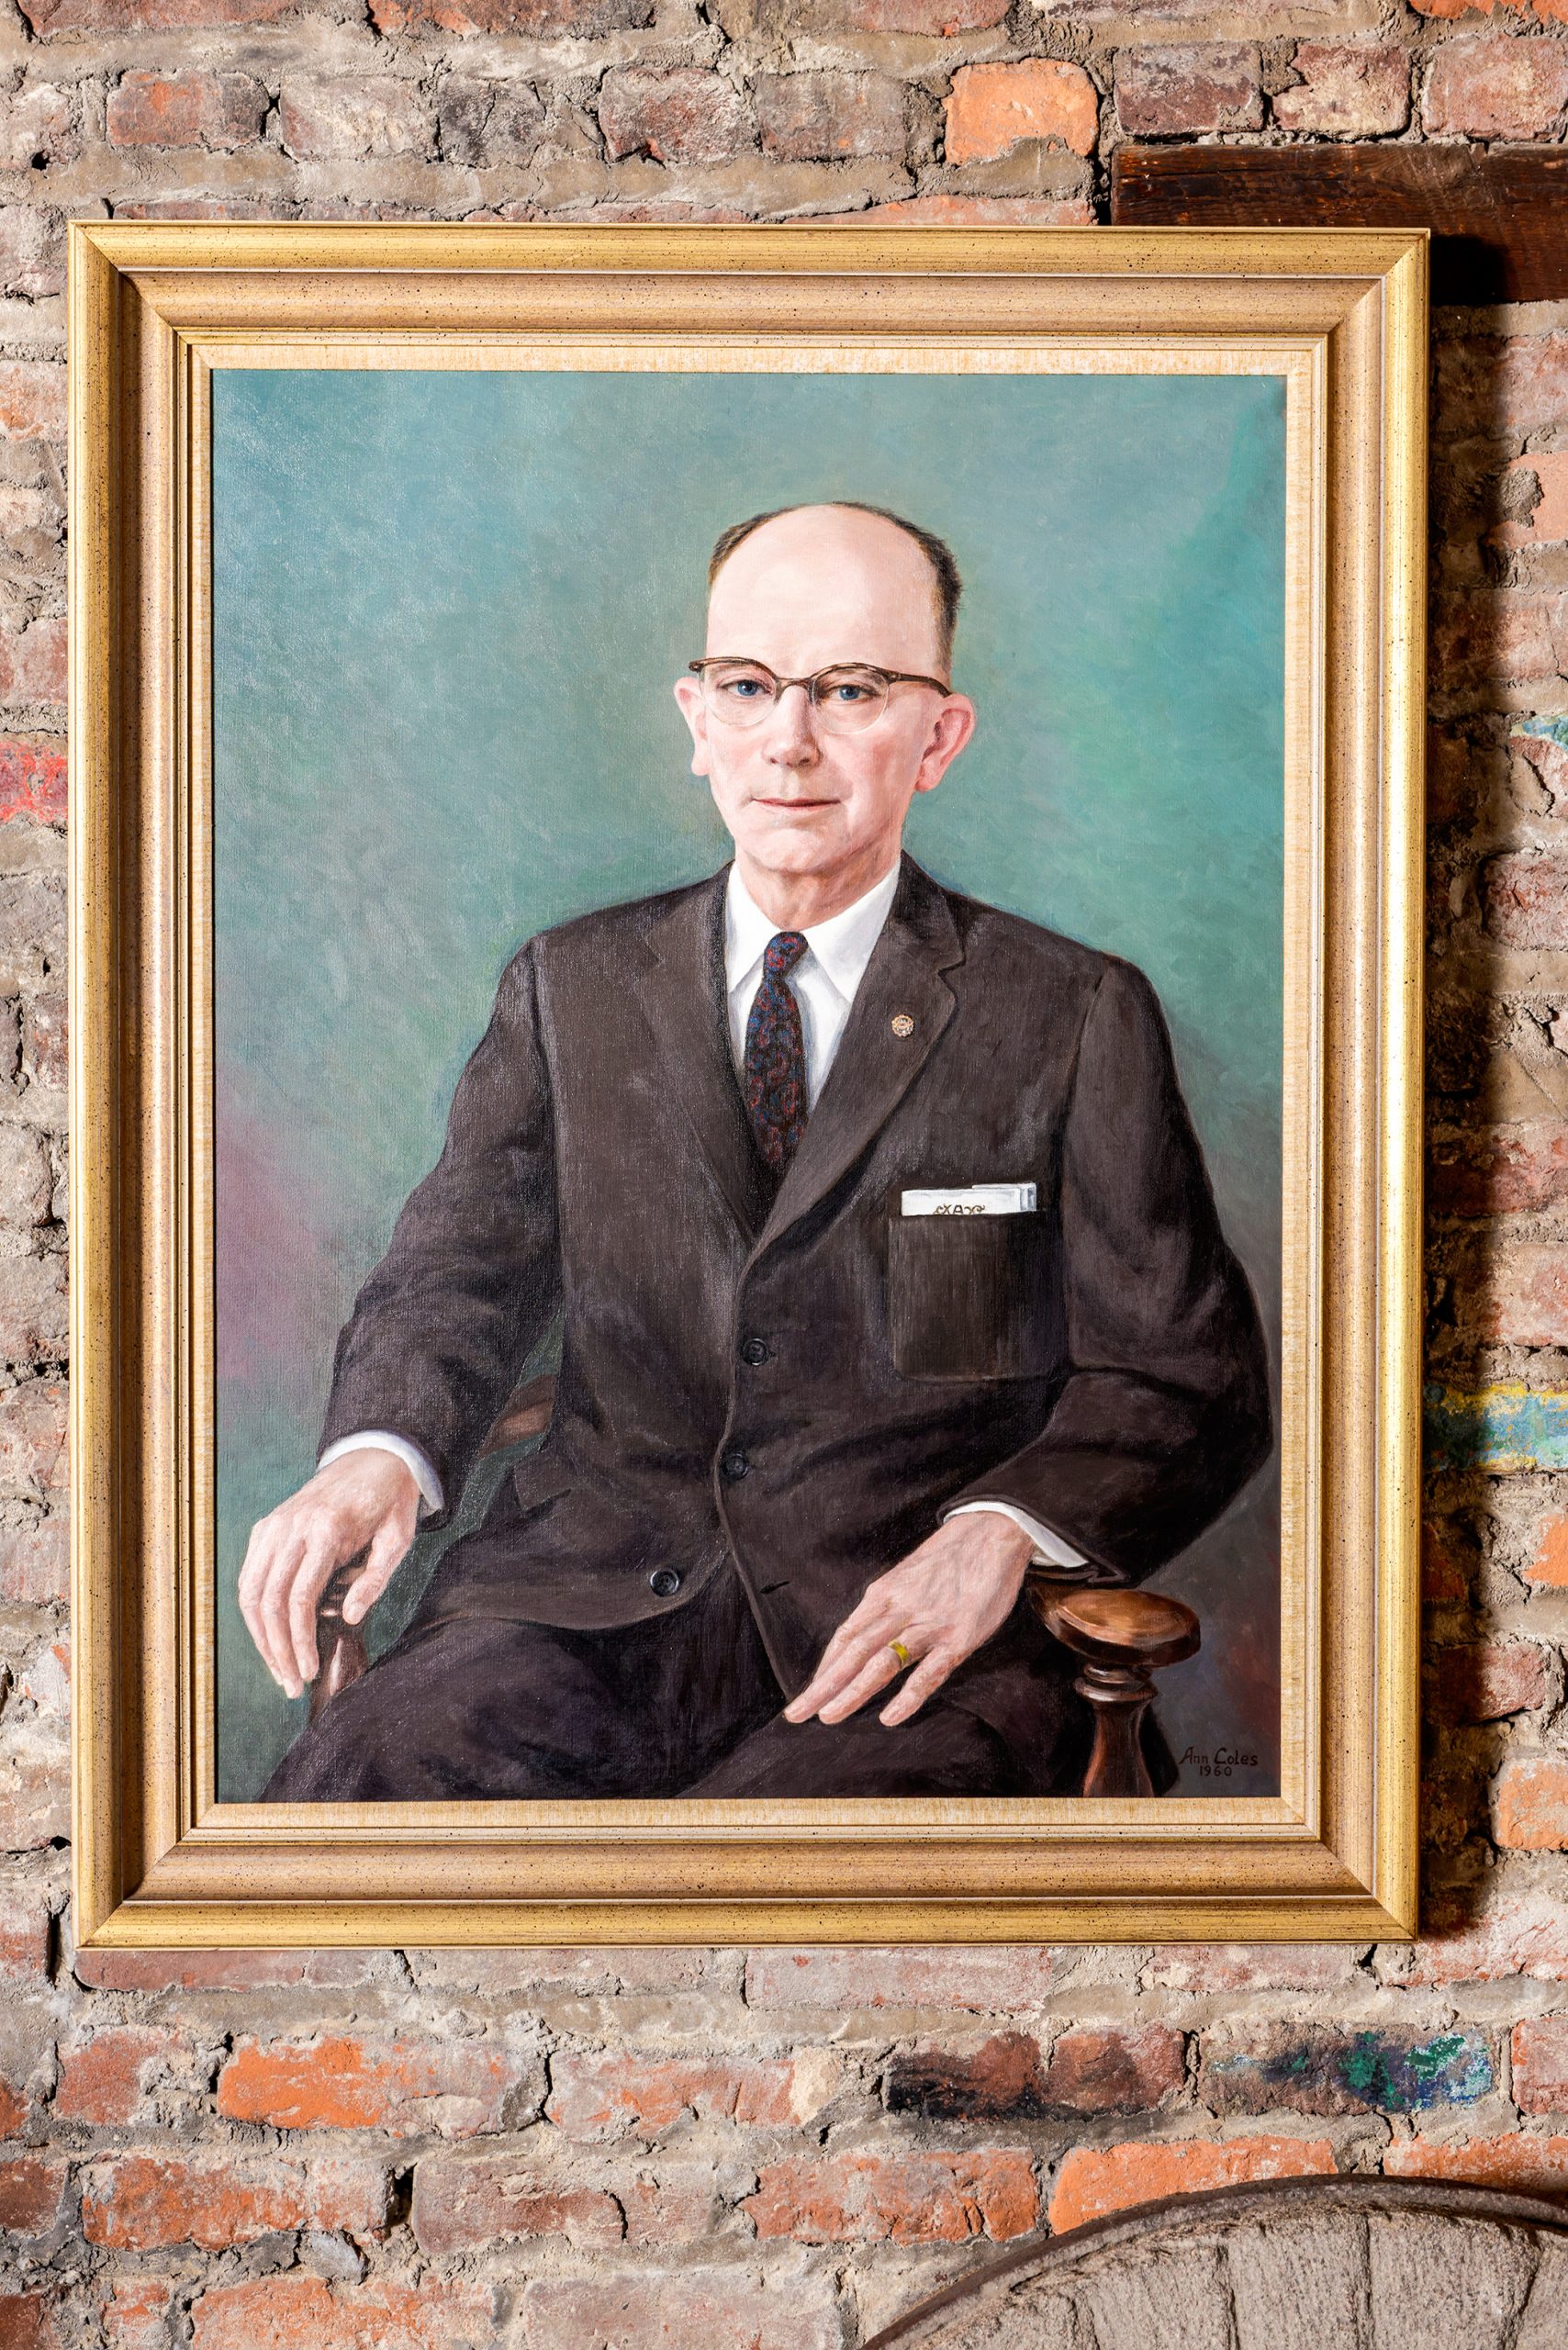 Portrait of J.B. Allen, Sr., who was president and owner of Adluh Flour until his death in1979. He was also well known as one of the original Allen brothers who purchased Adluh Flour in 1926.